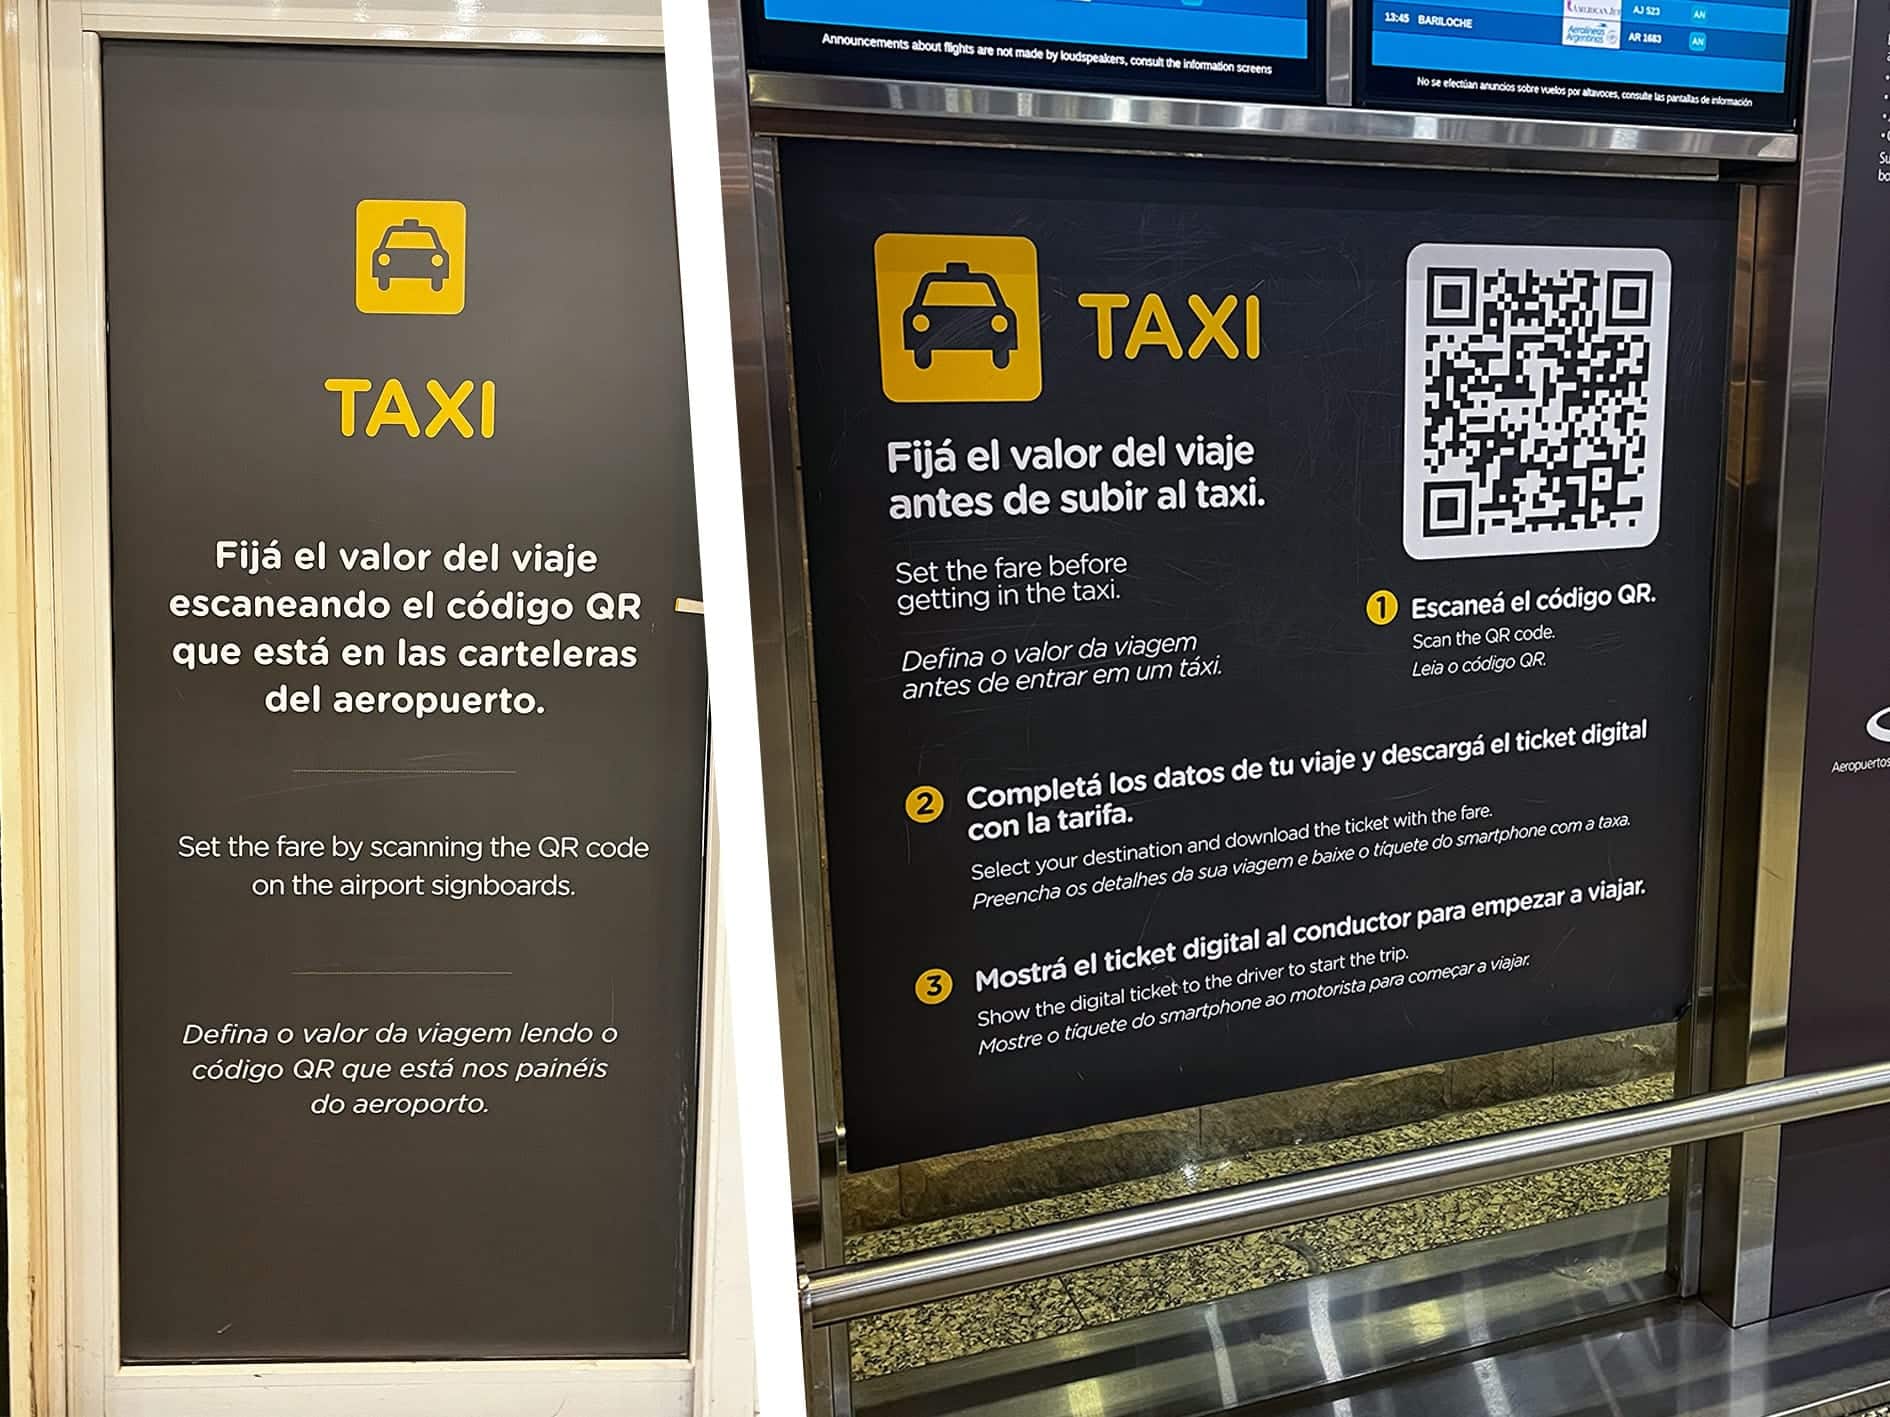 Taxi QR code at Jorge Newbery and Ezeiza